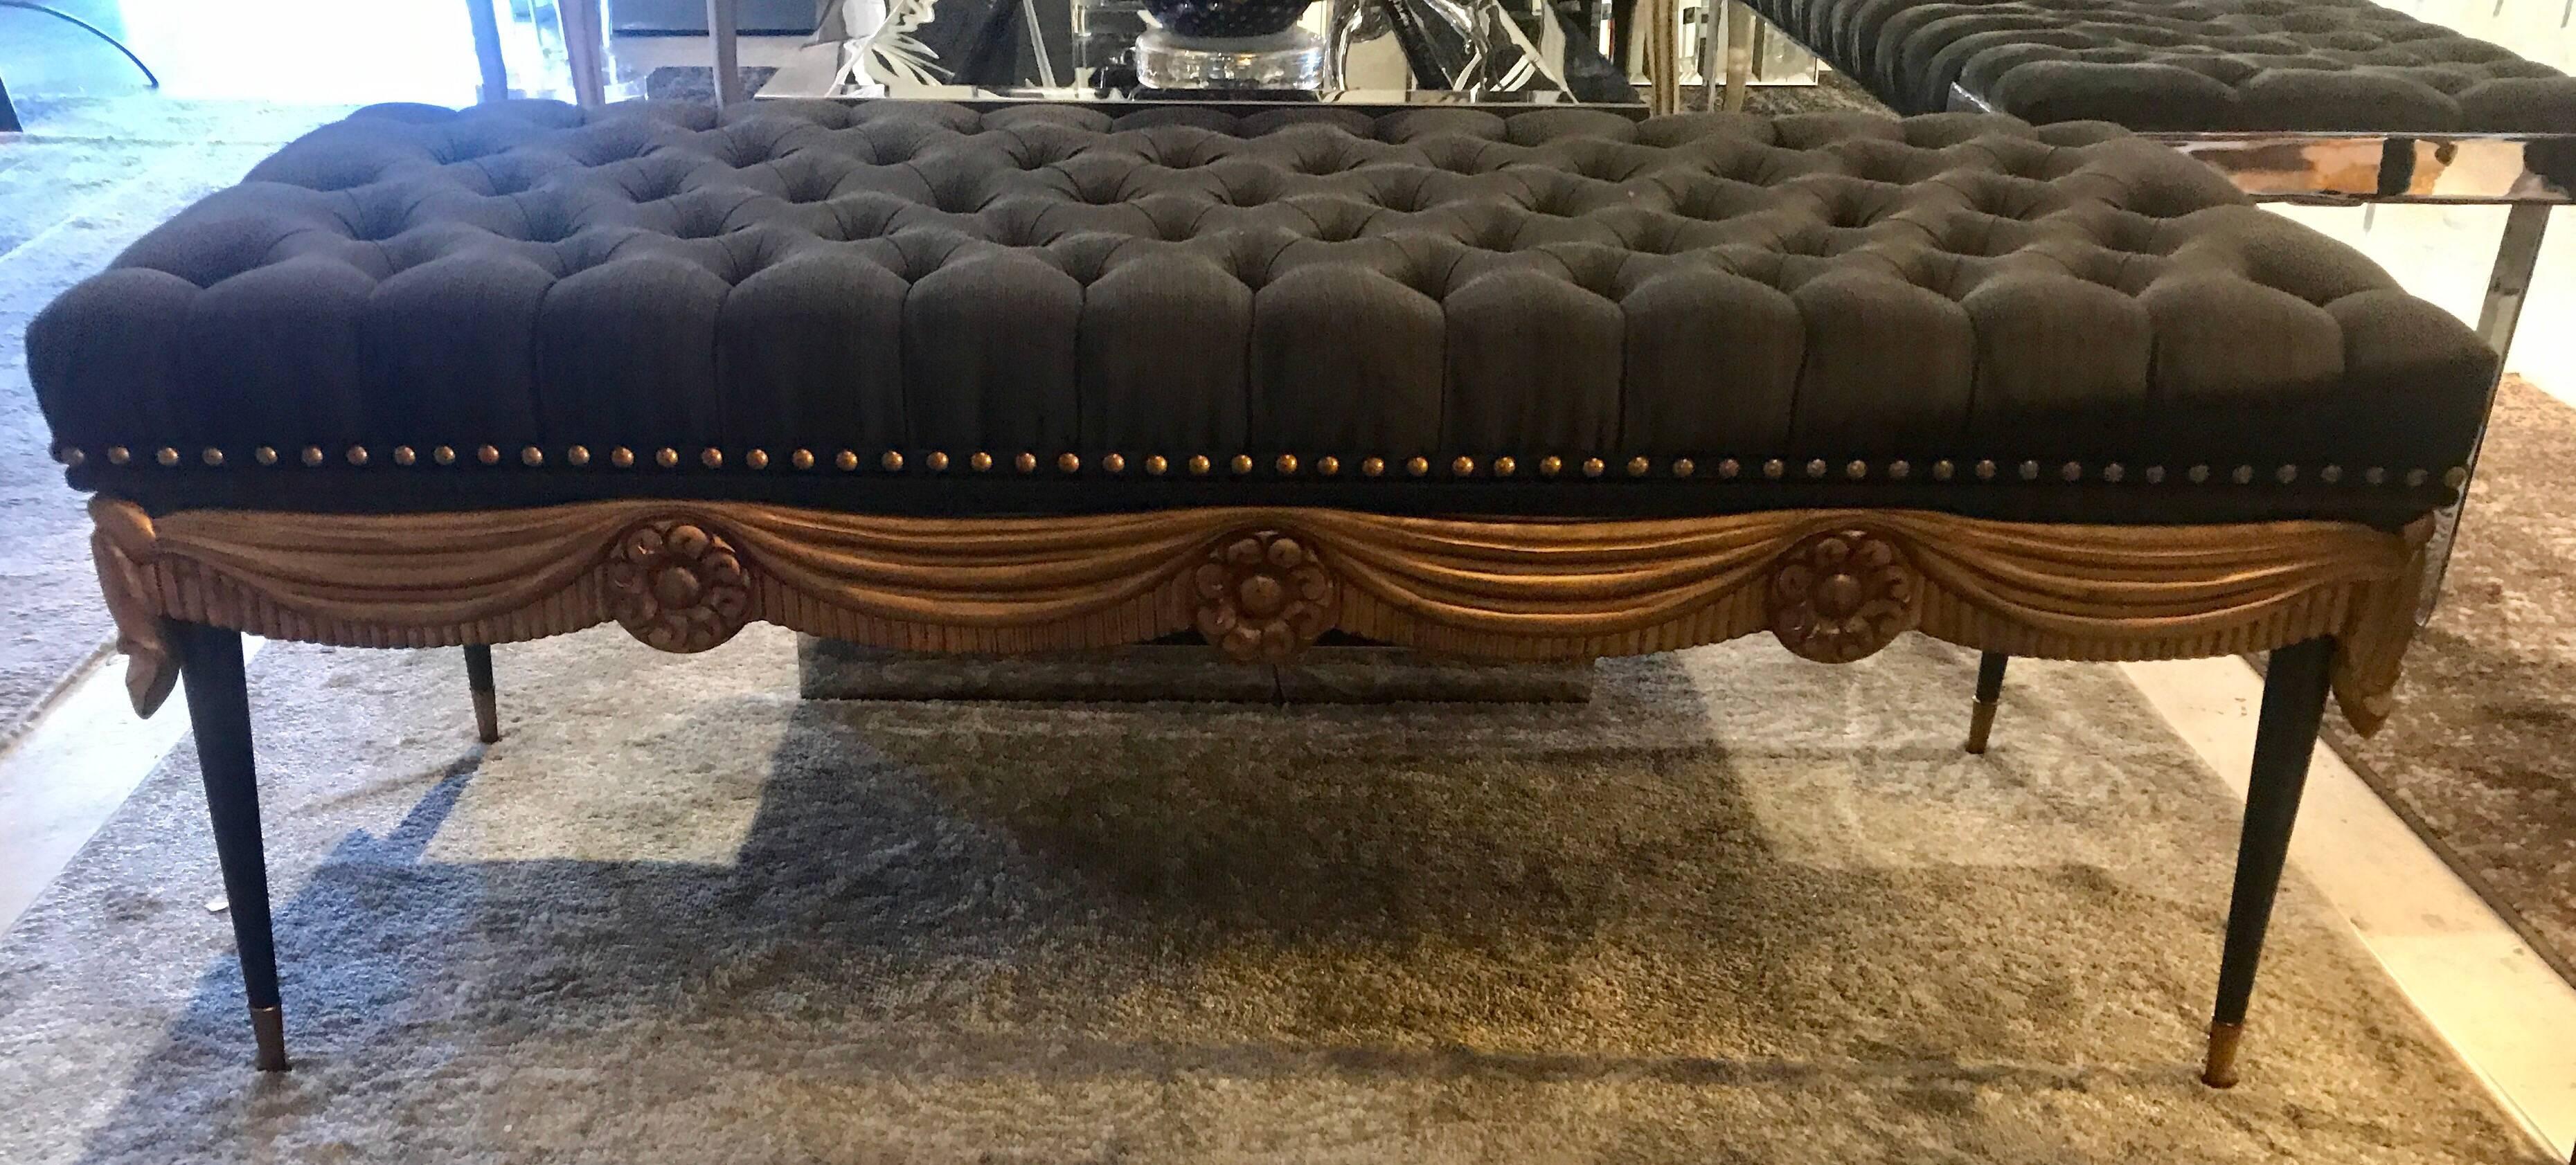 Exquisite pair of midcentury benches of carved and gilded wood, tufted upholstery, and bronze sabots attributed to Maison Jansen.